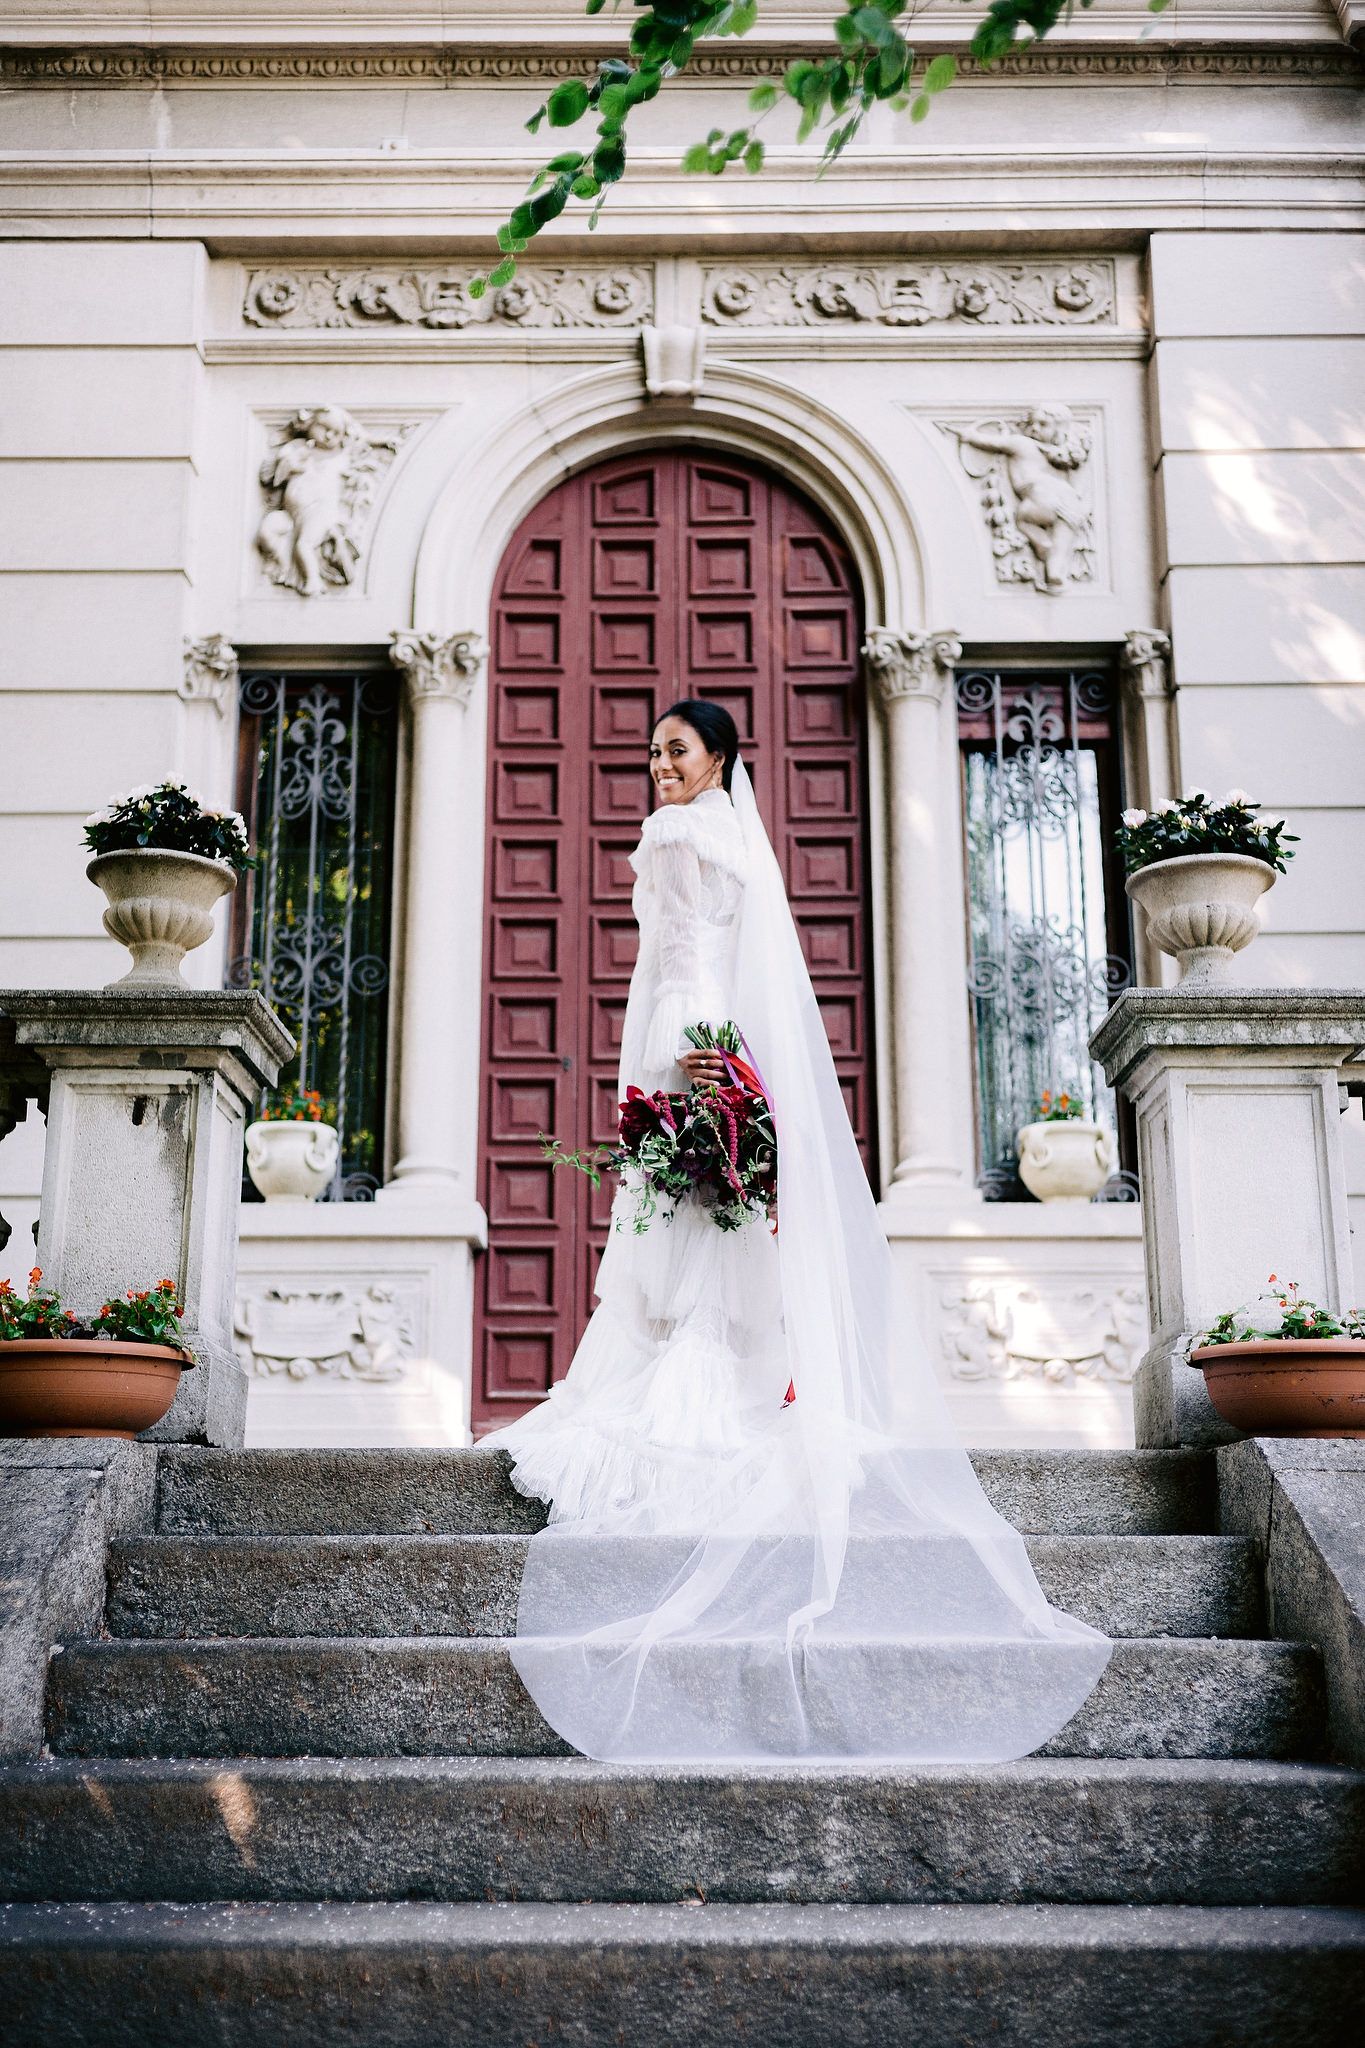 The bride is standing on the top of the stairs, her long veil flowing down at Villa Confalonieri, Lake Como